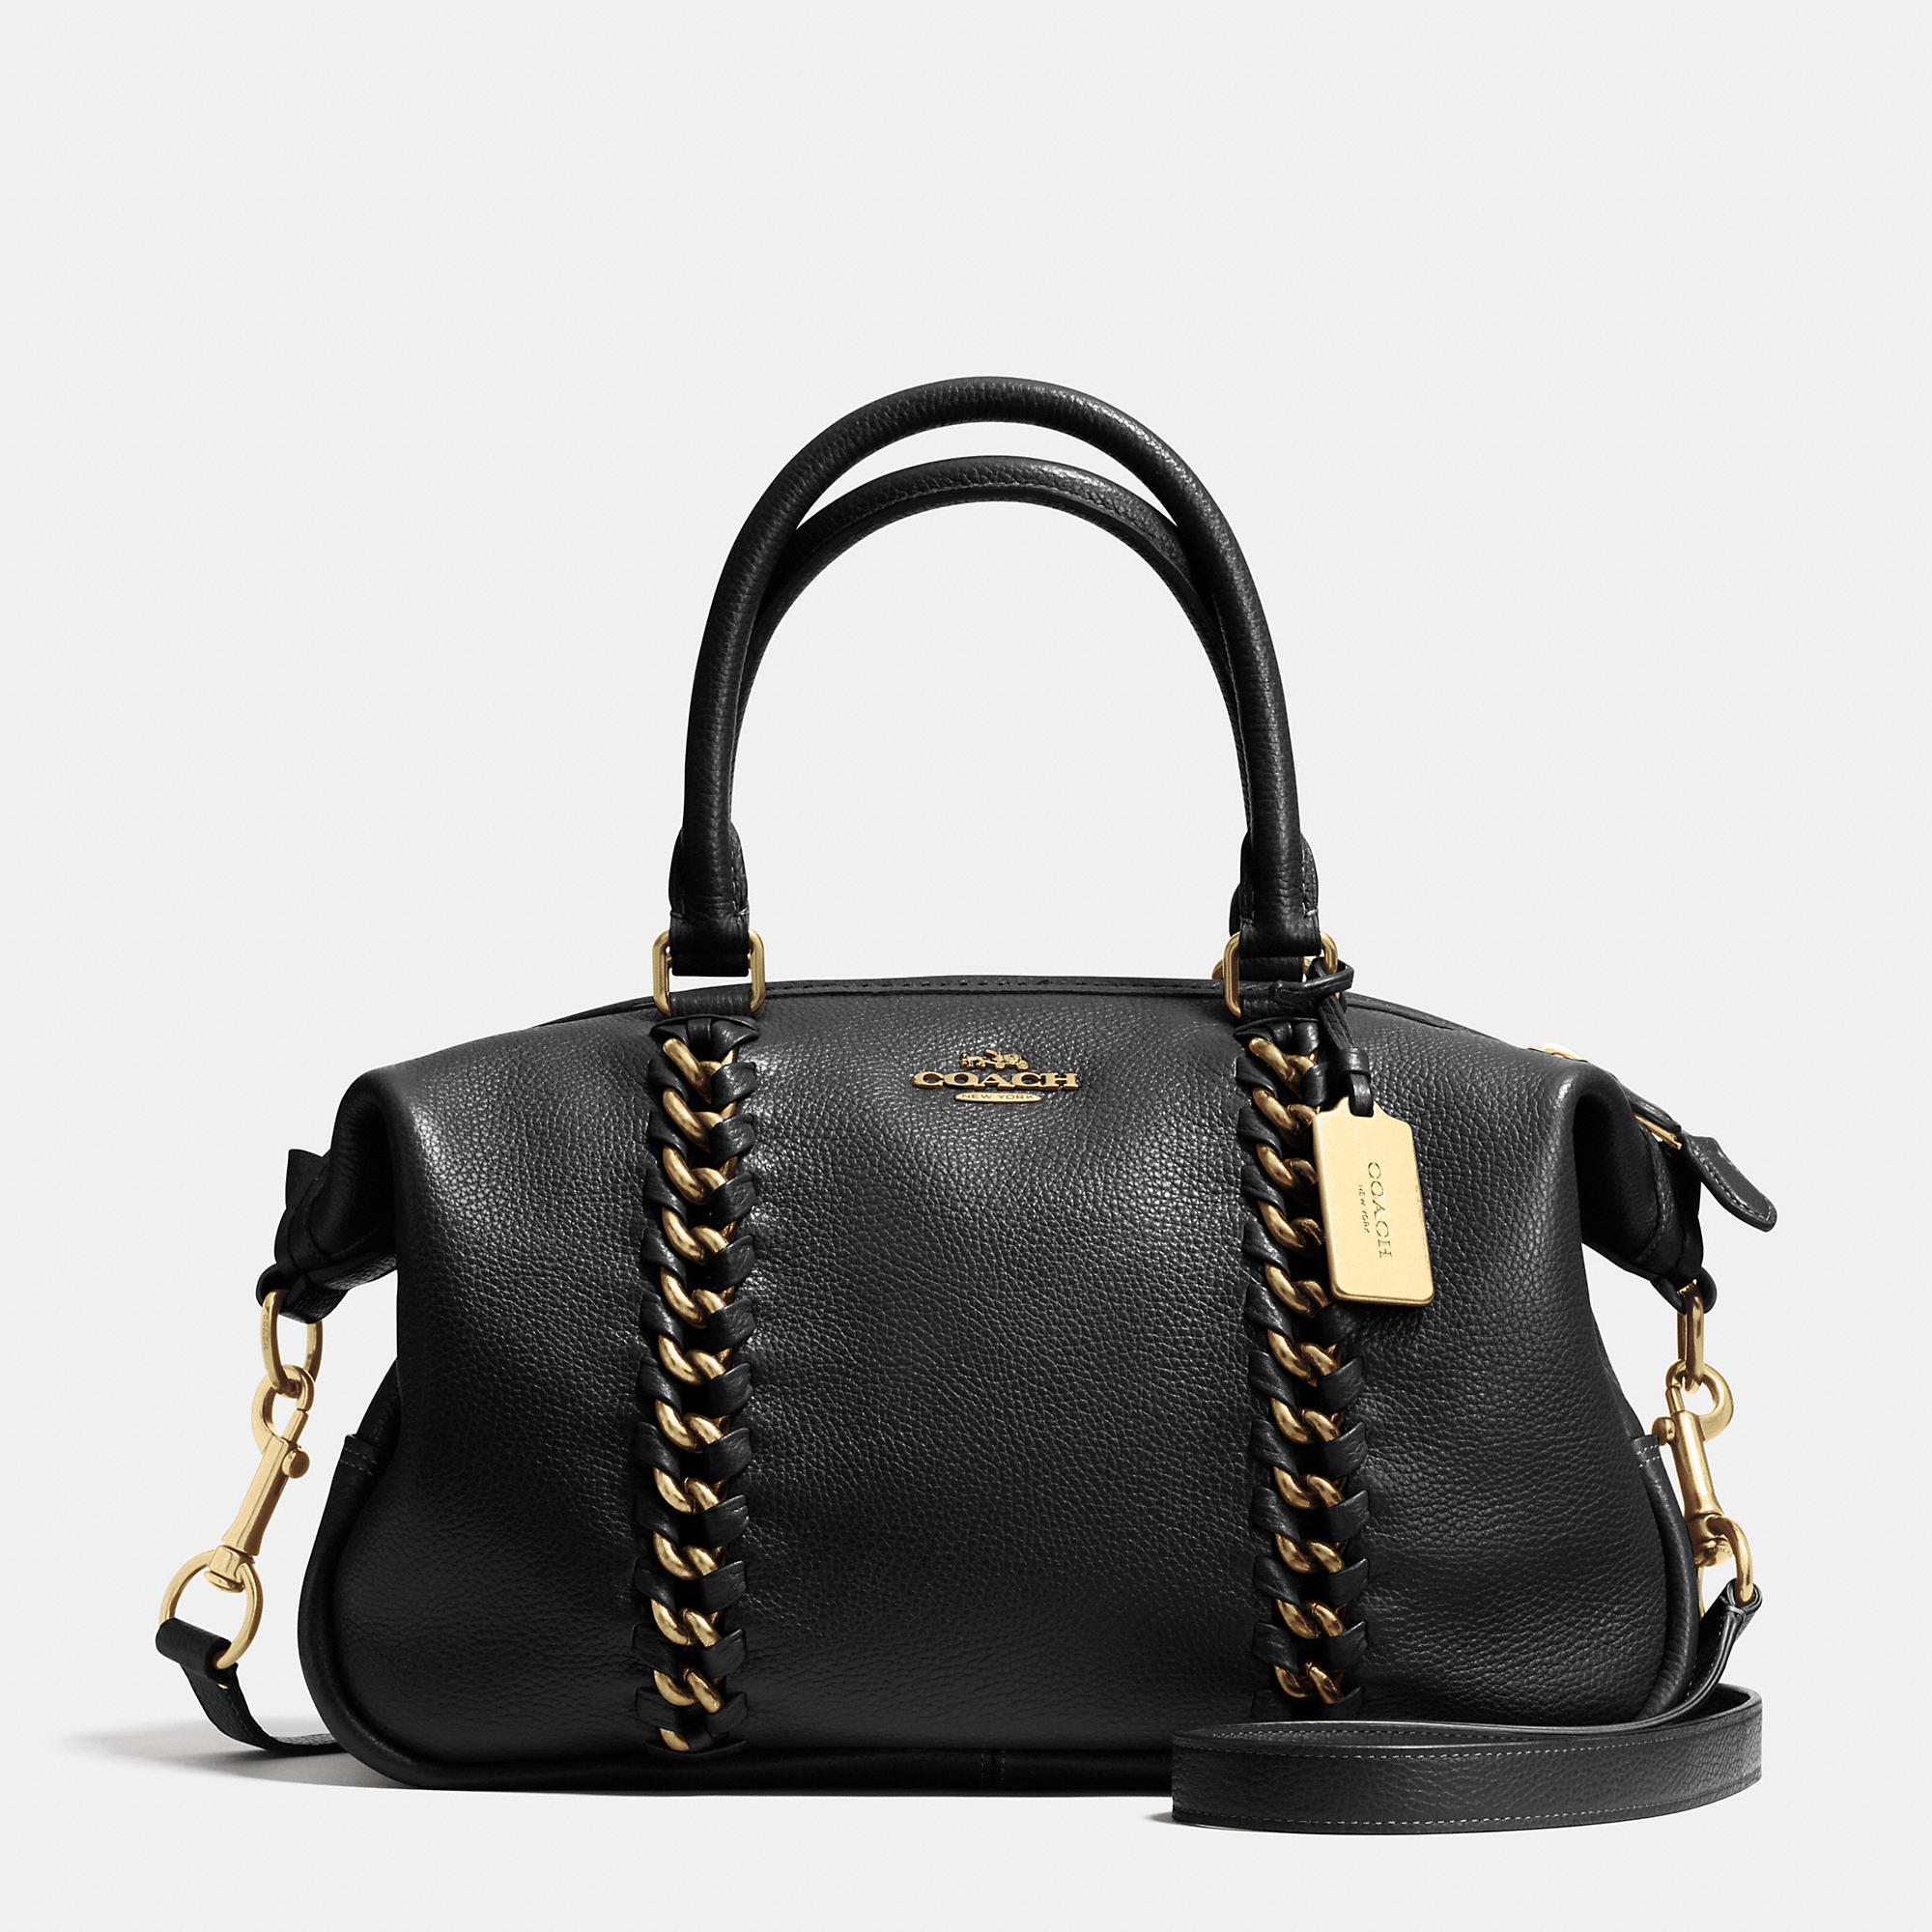 Lyst - Coach Central Whiplash Leather Satchel in Black